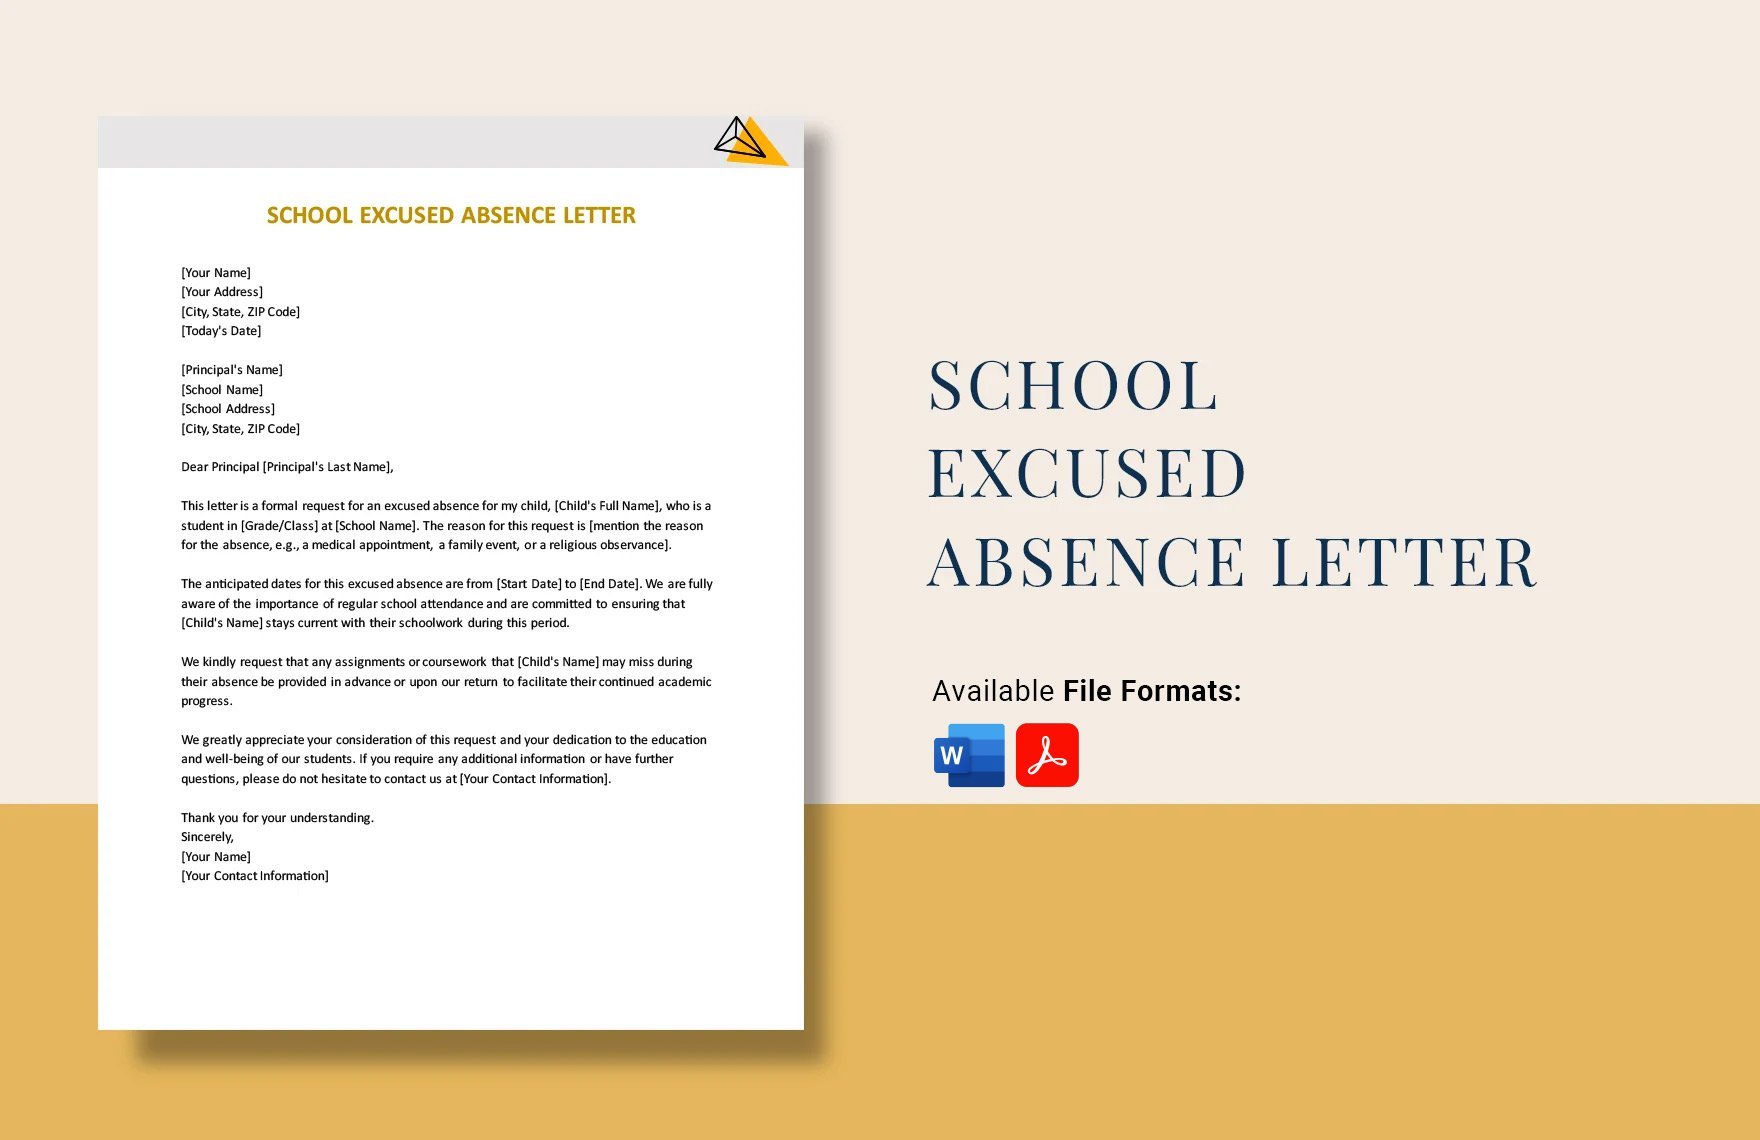 School Excused Absence Letter in Word, PDF